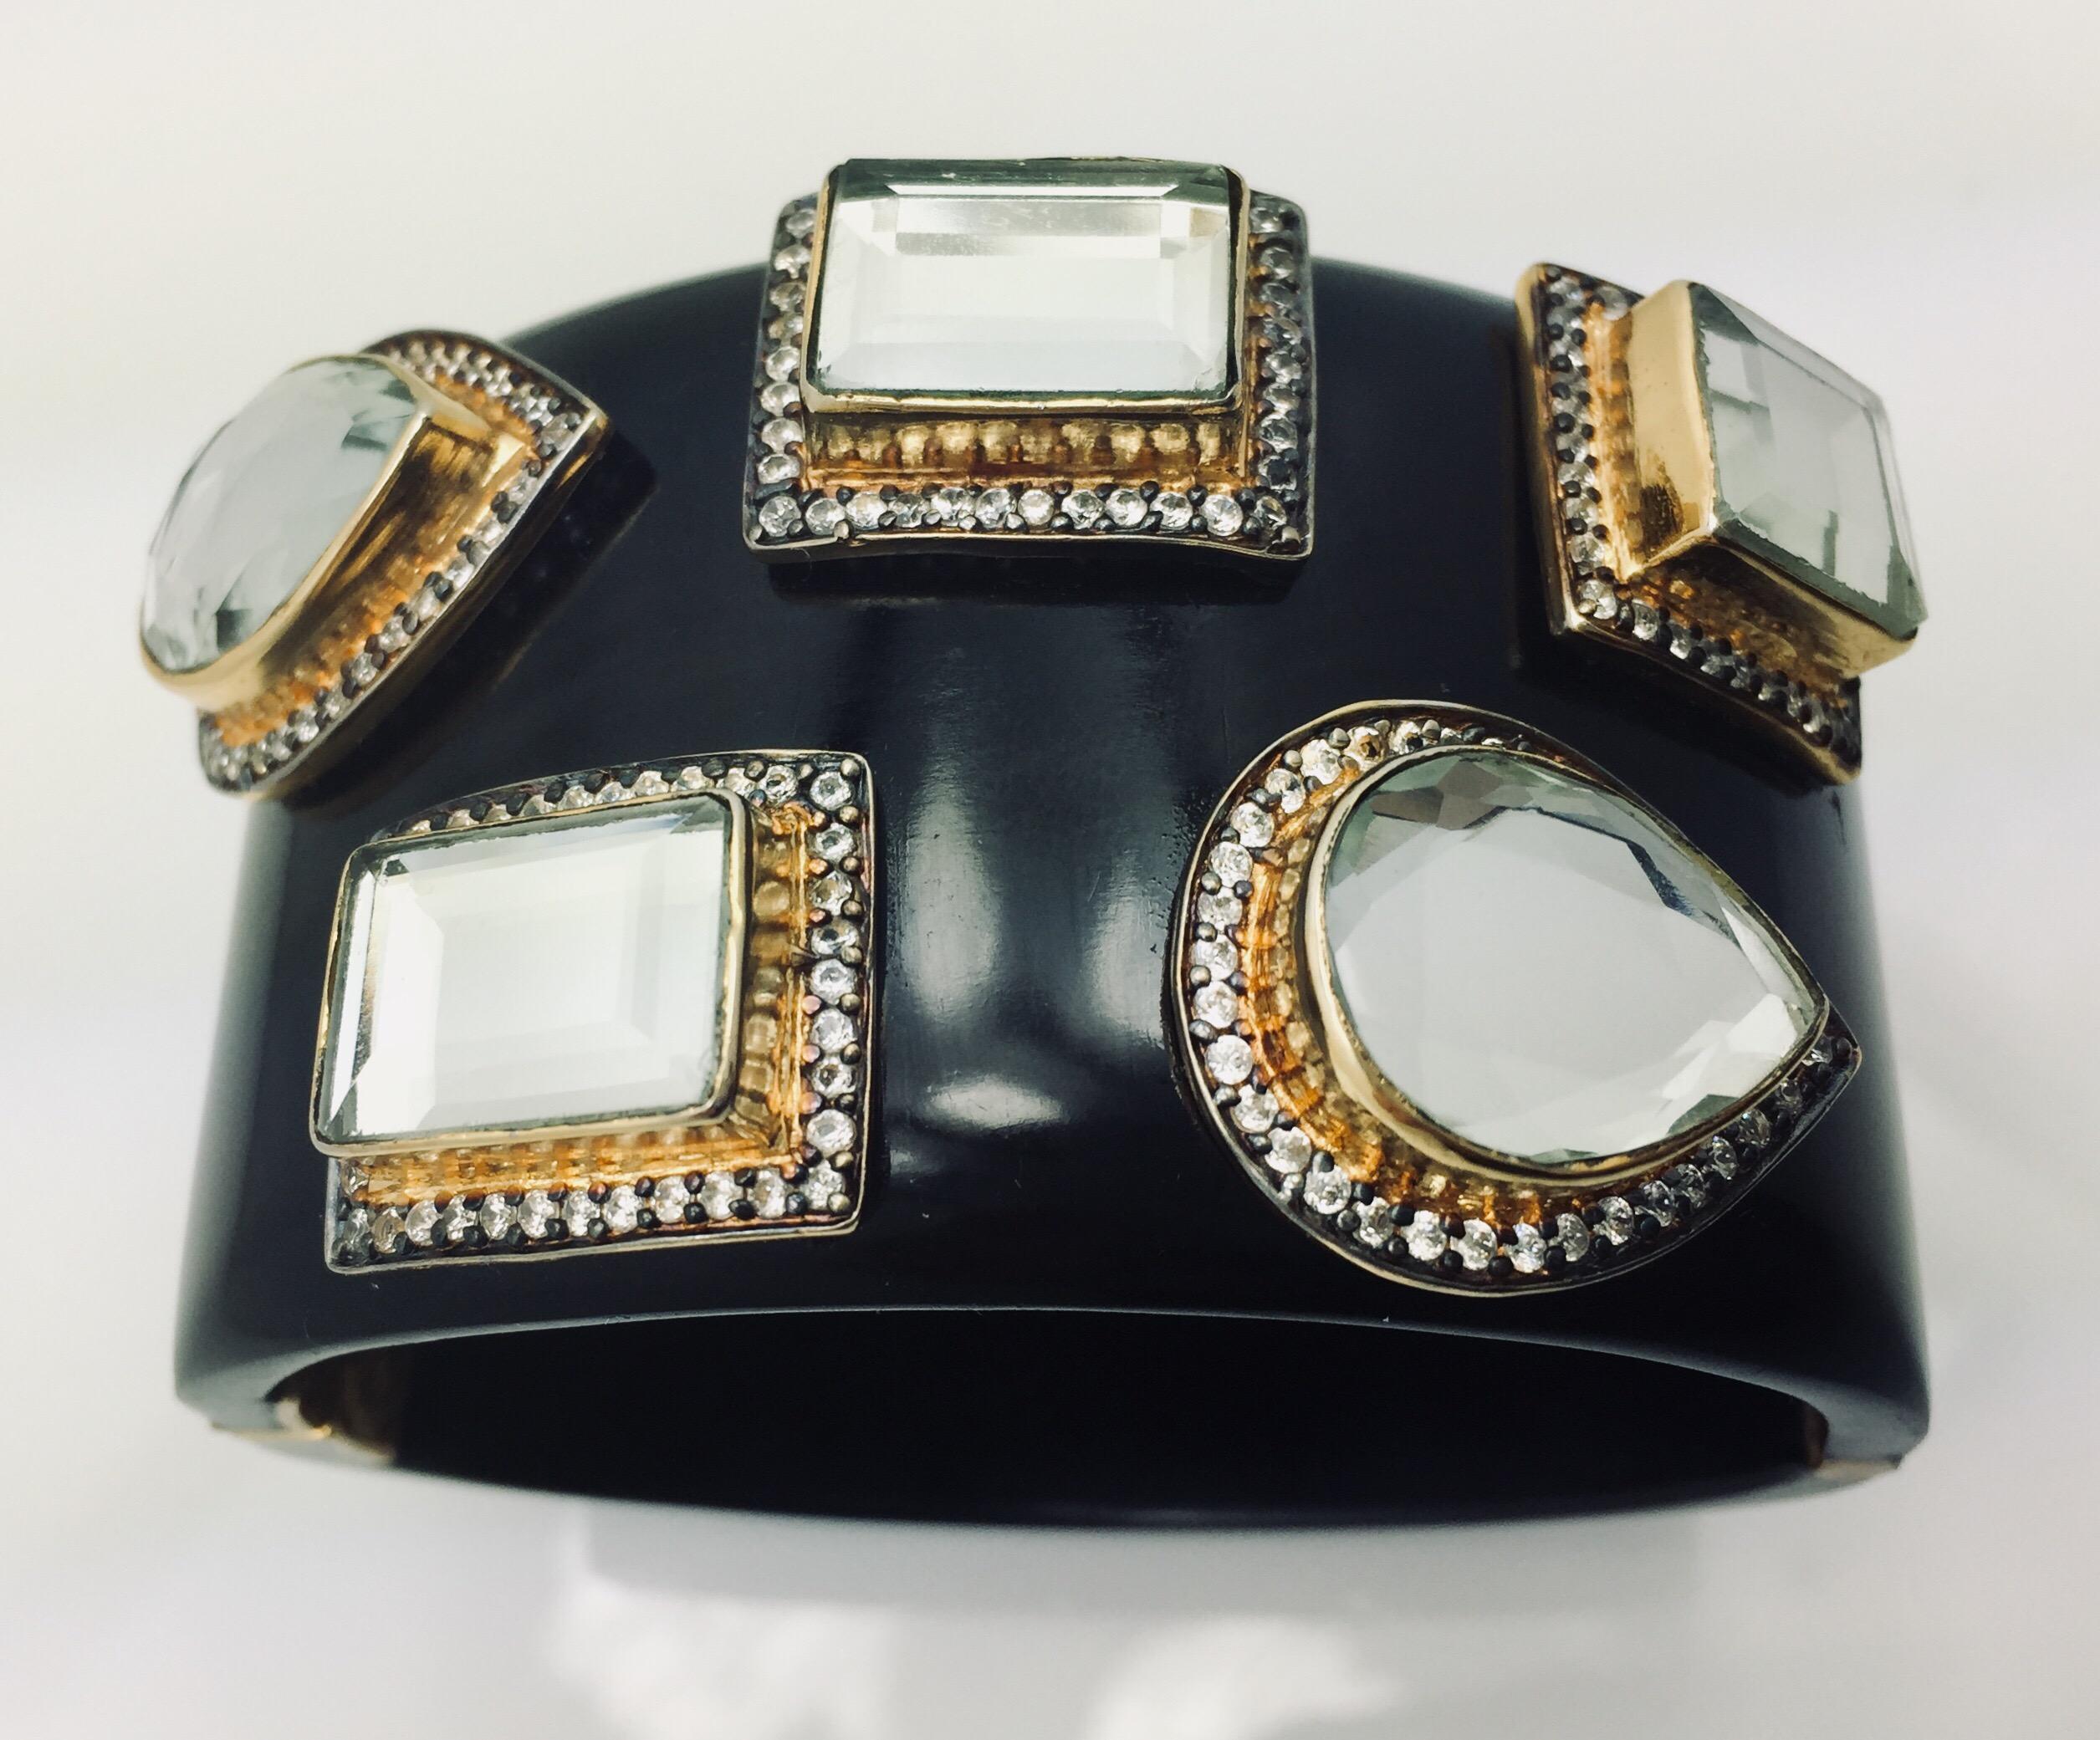 The smooth, black resin bracelet provides a stunning backdrop for the various shapes of light reflective polki mirror stones, each of which has its own frame of dazzling CZs. Bracelet has a hinged, box tab closure.

Available in Black Onyx and